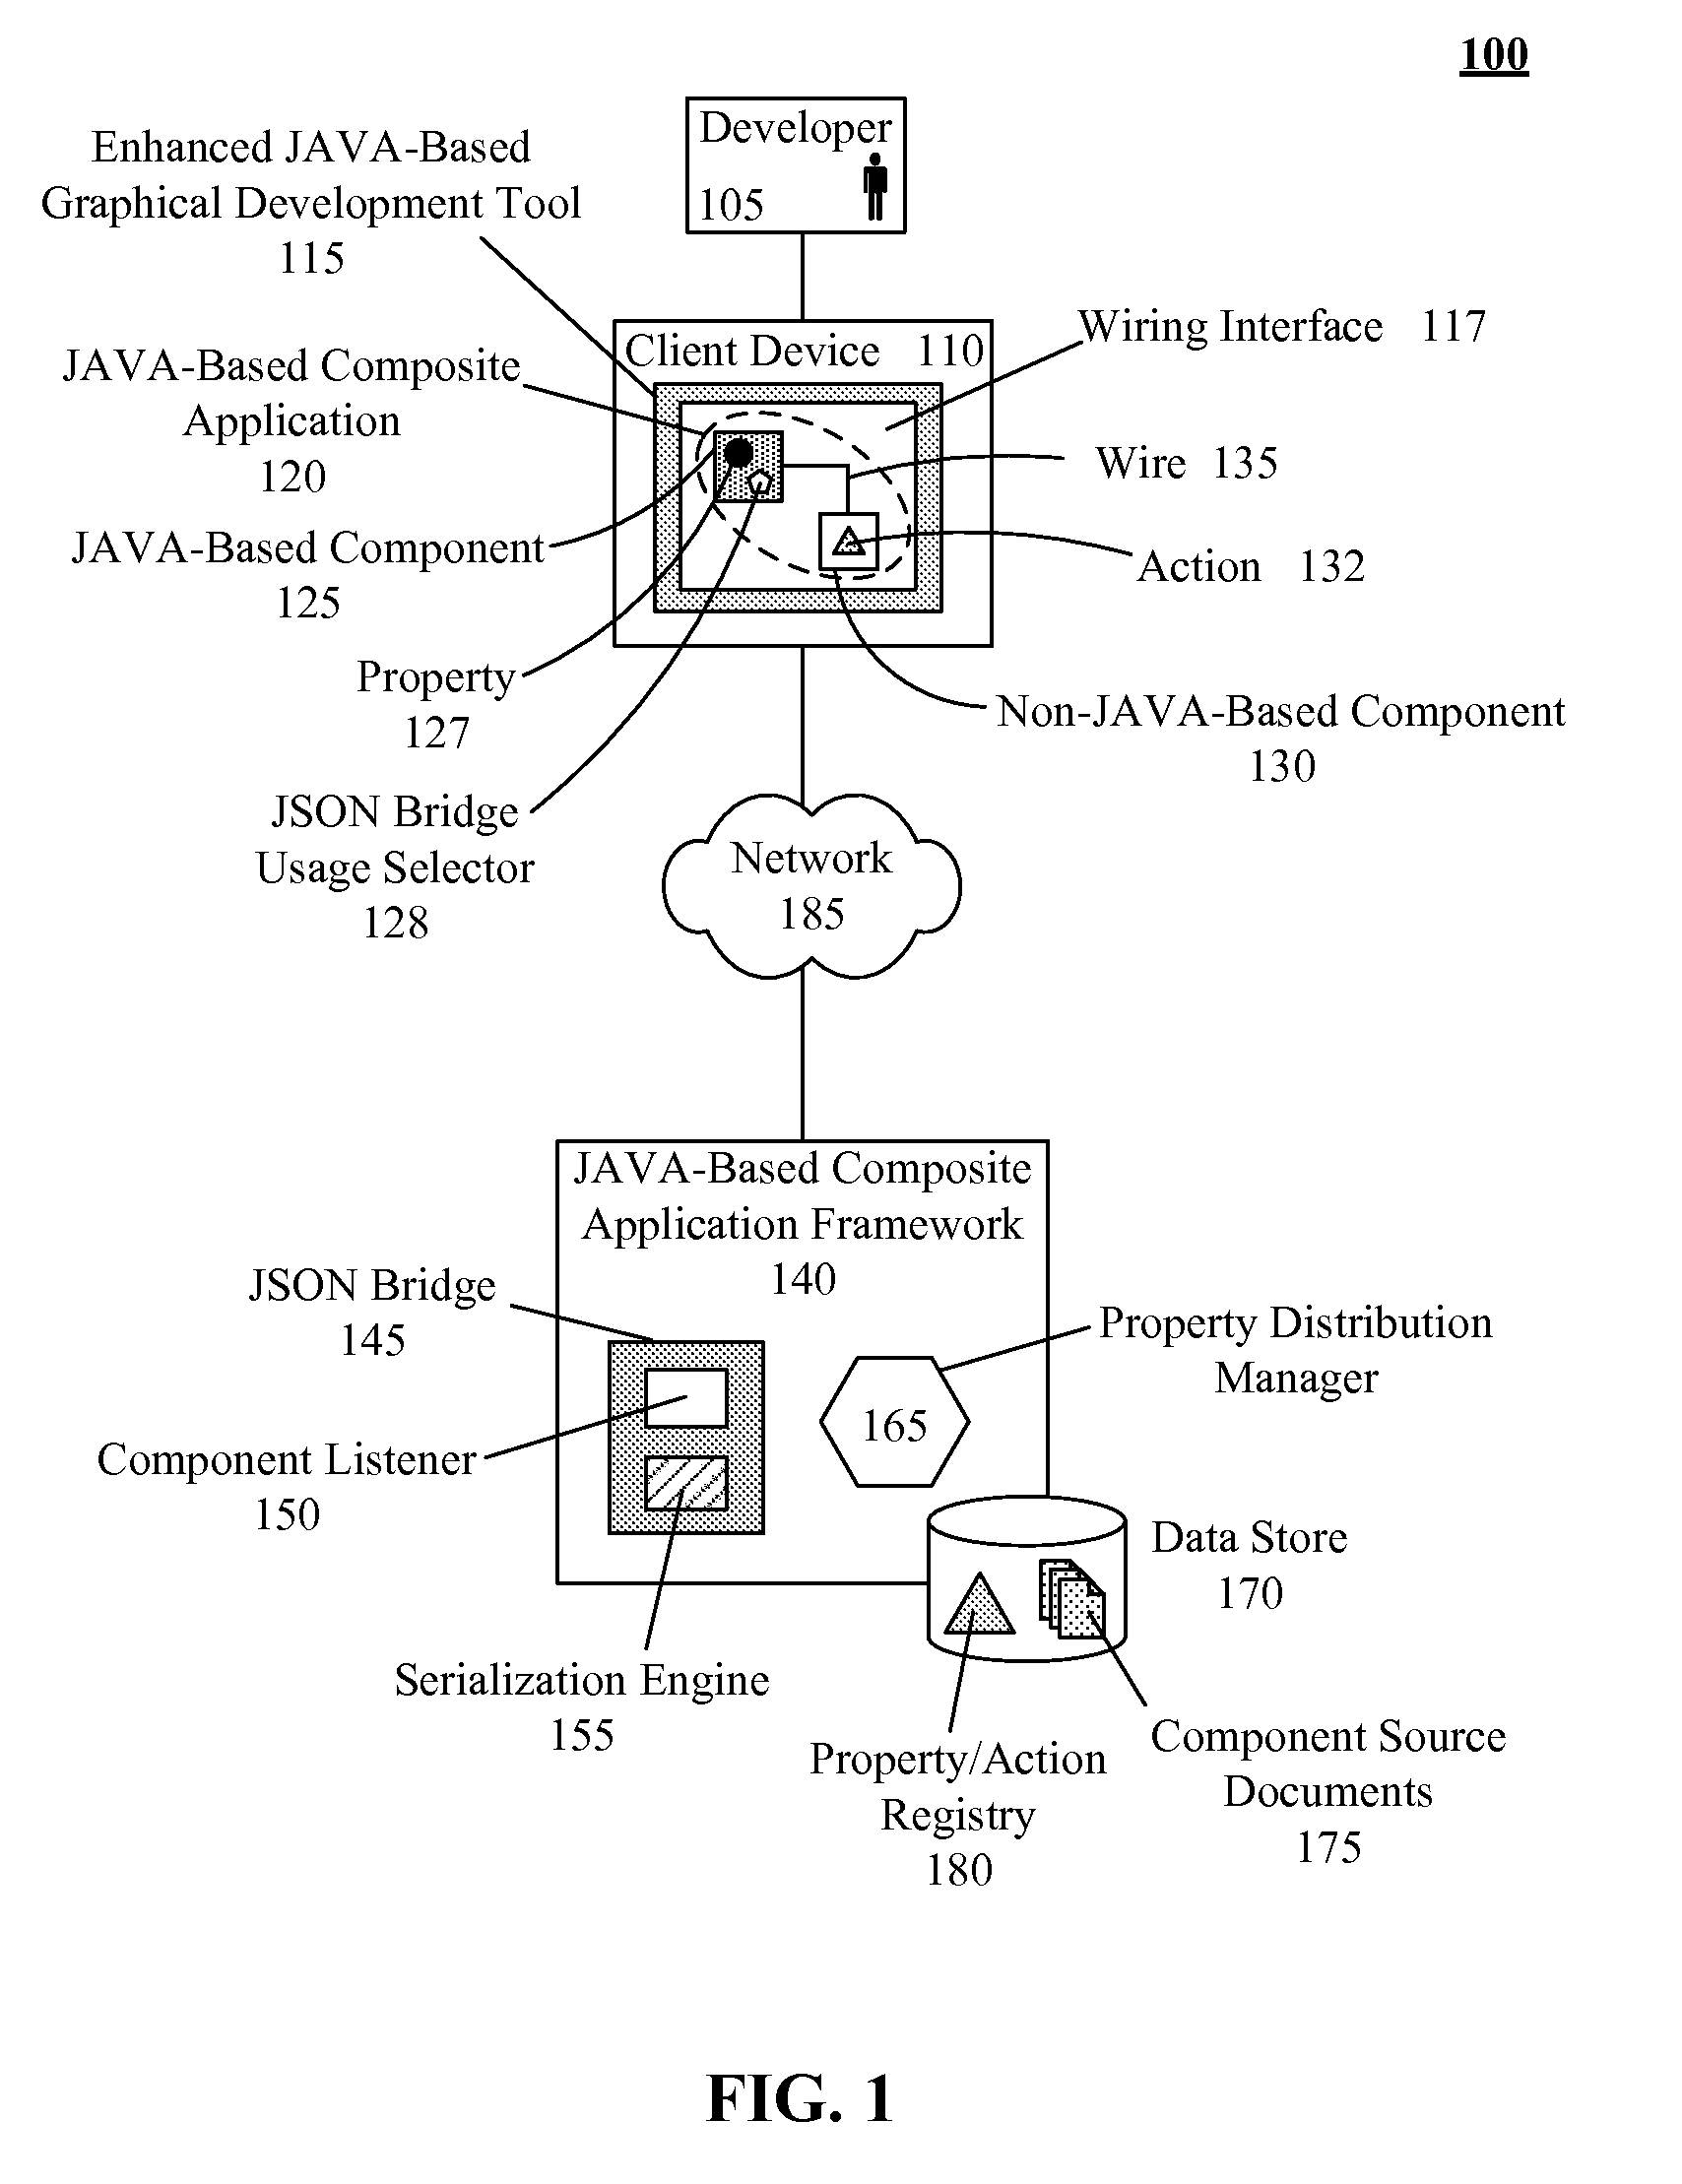 Enhanced development tool for utilizing a javascript object notation (JSON) bridge for non-java-based component communication within java-based composite applications